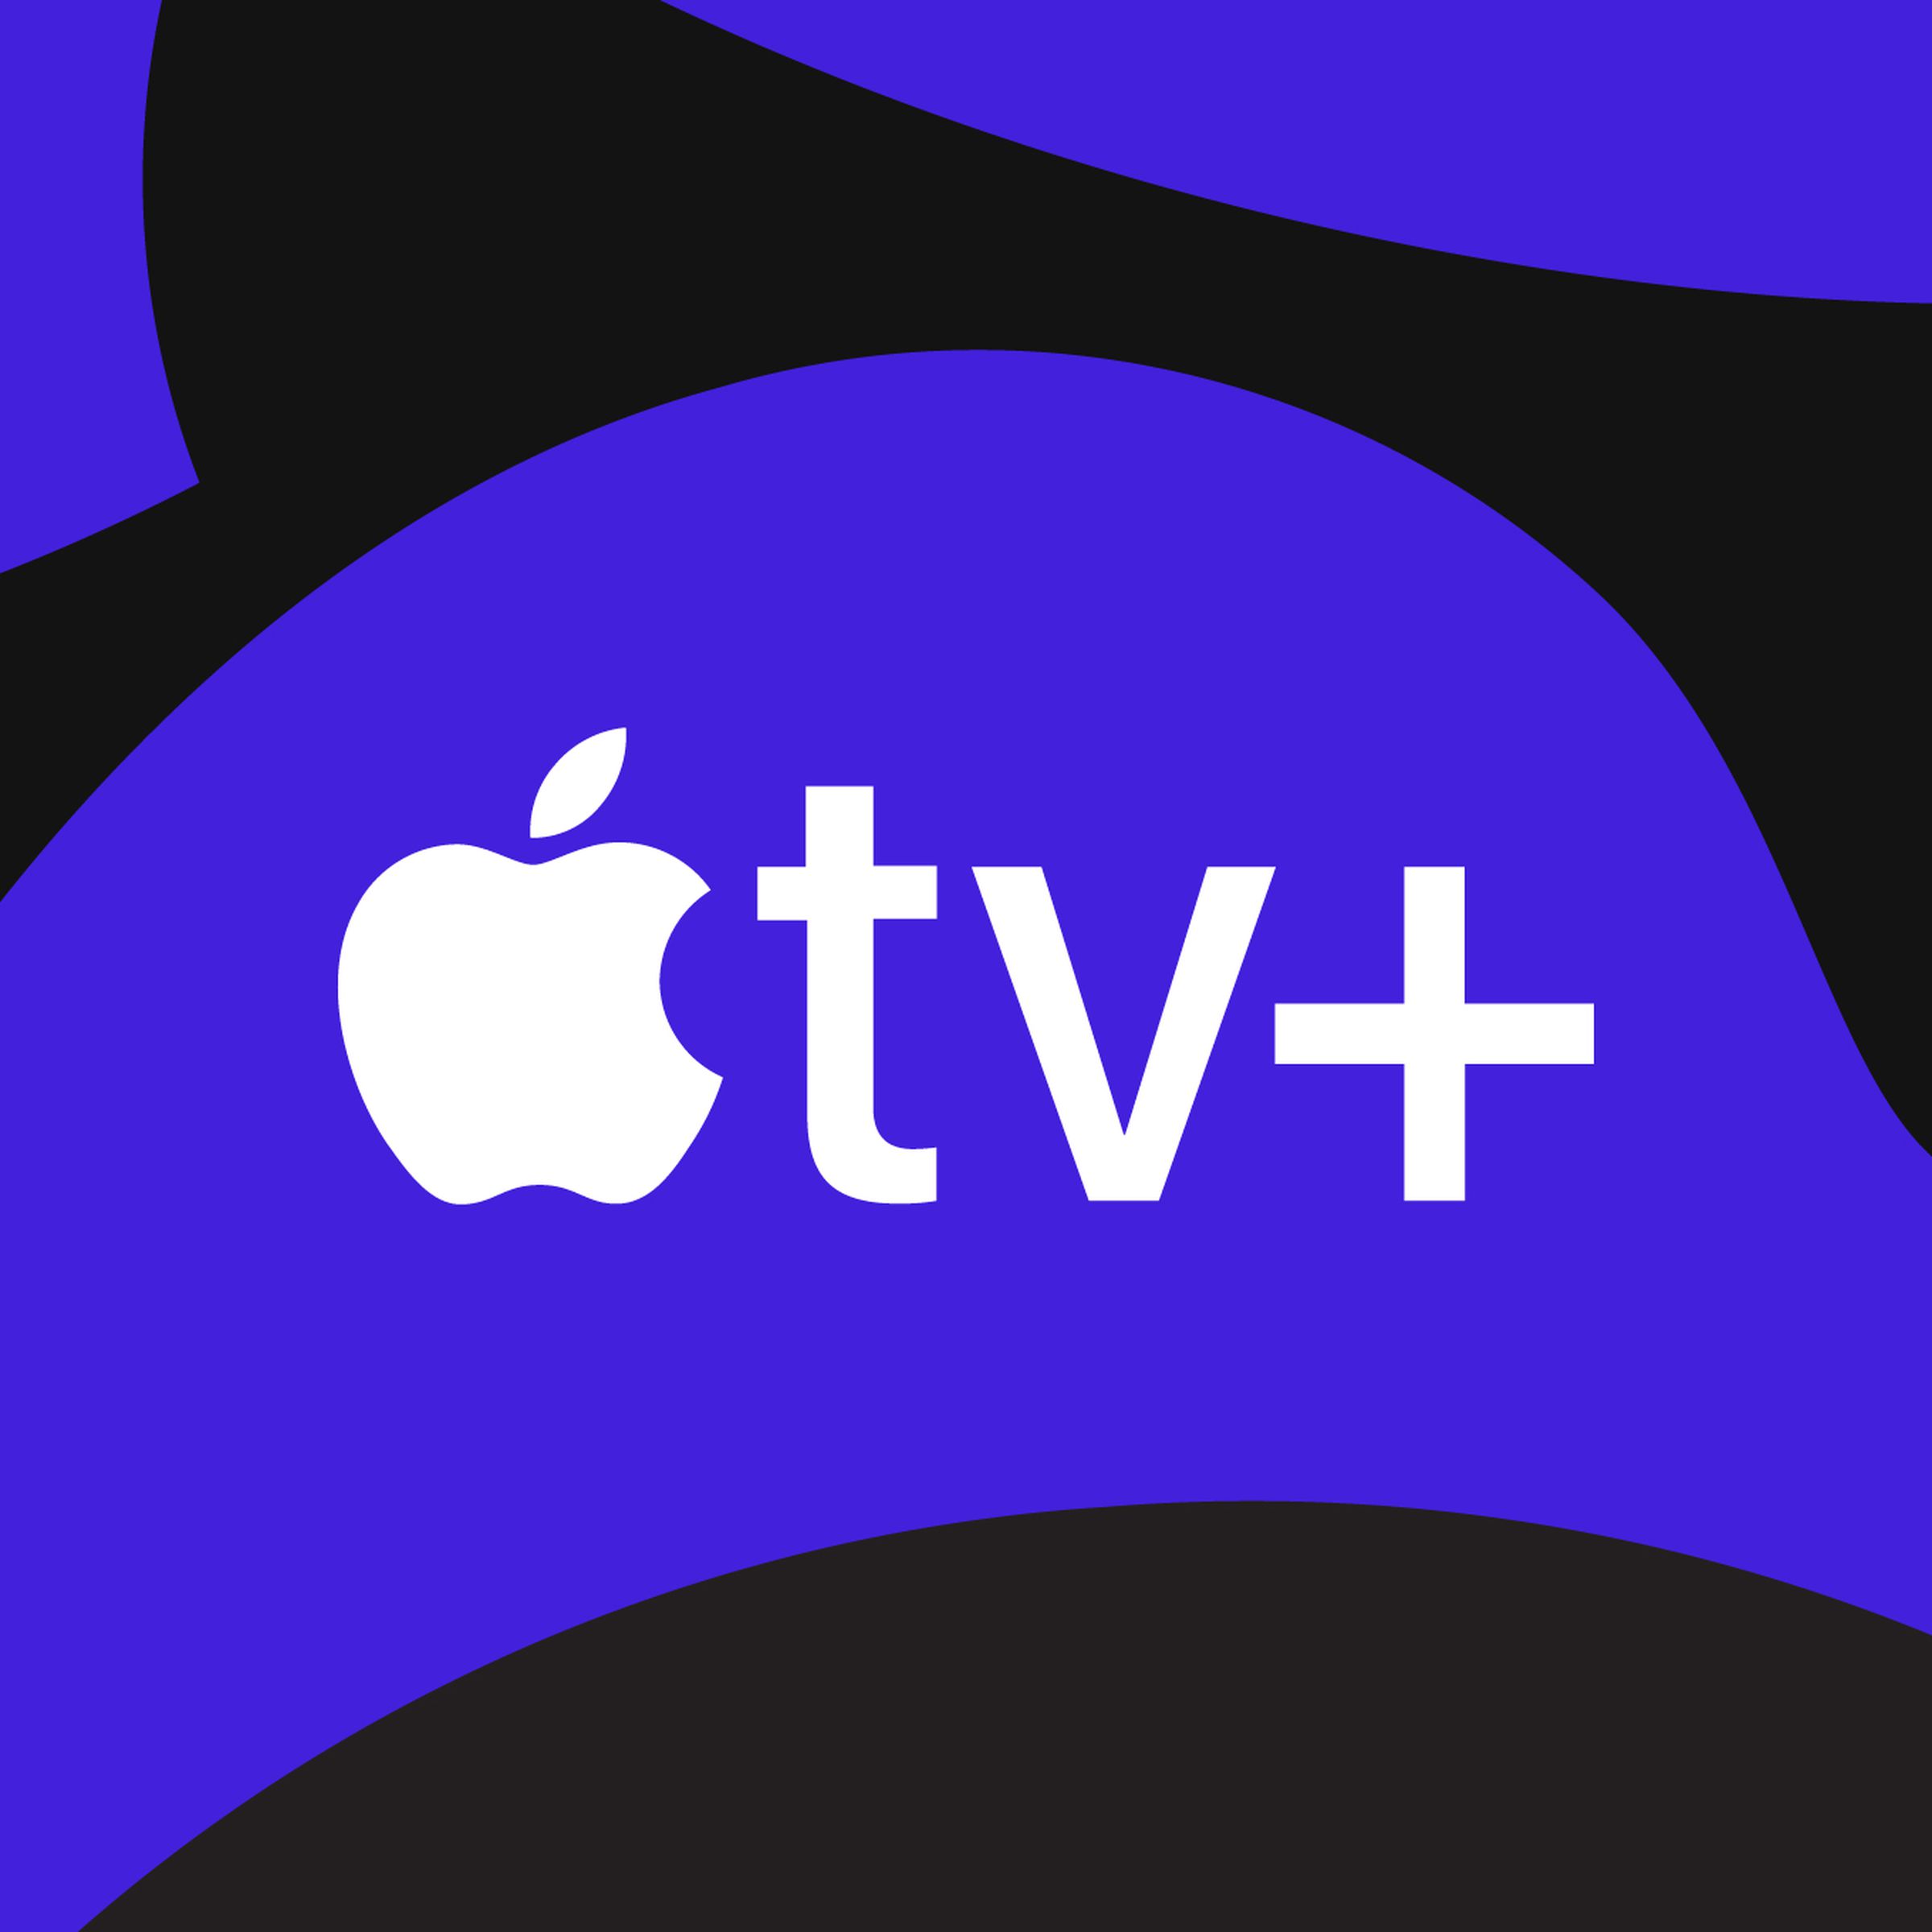 An image showing the Apple TV Plus logo on a black and purple background